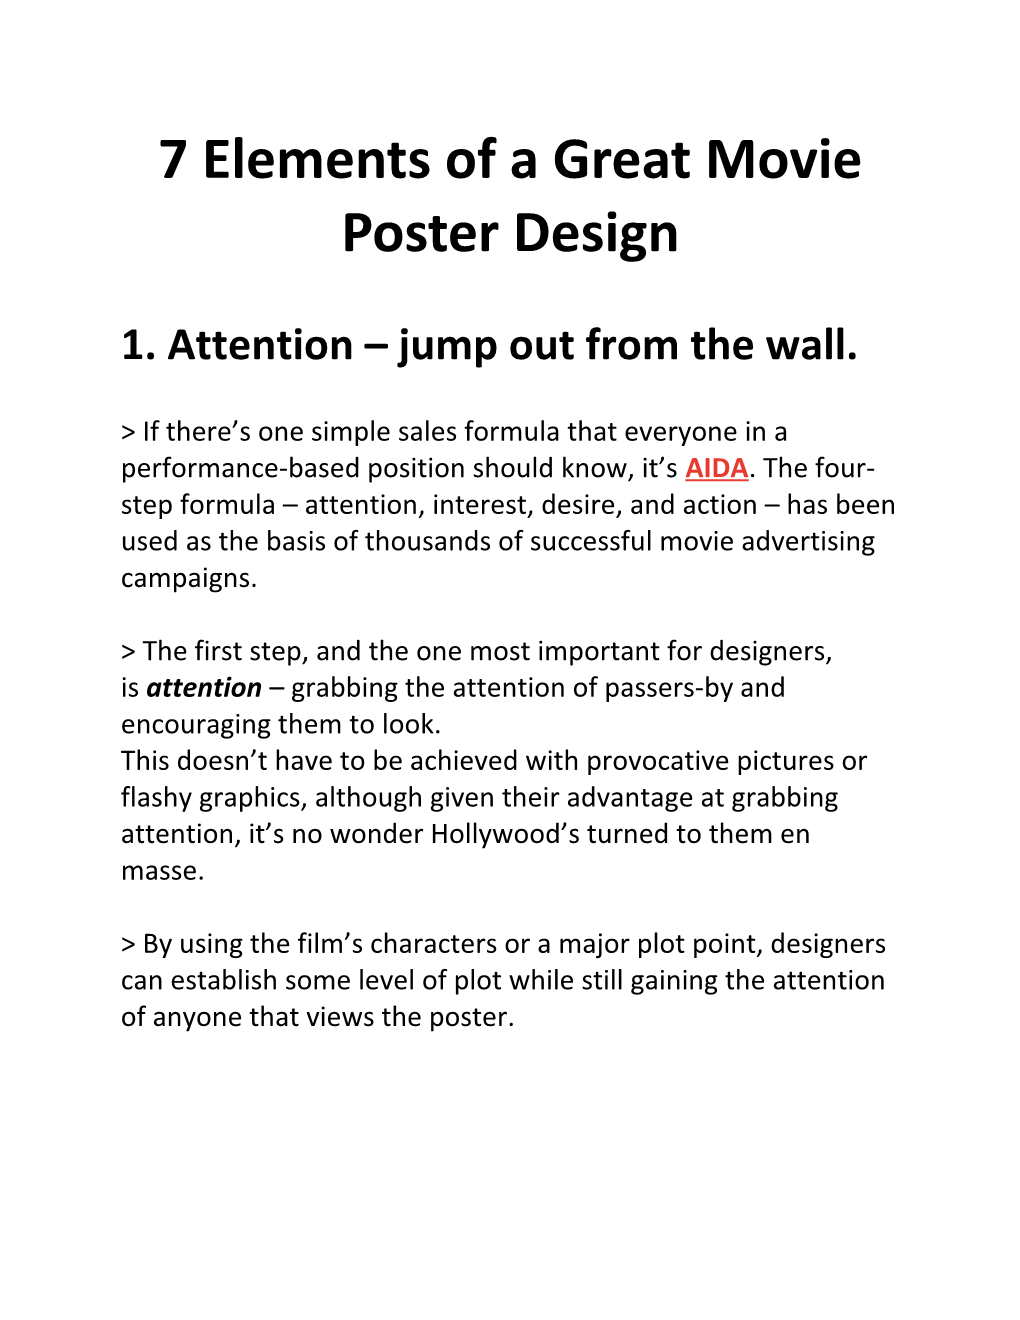 7 Elements of a Great Movie Poster Design